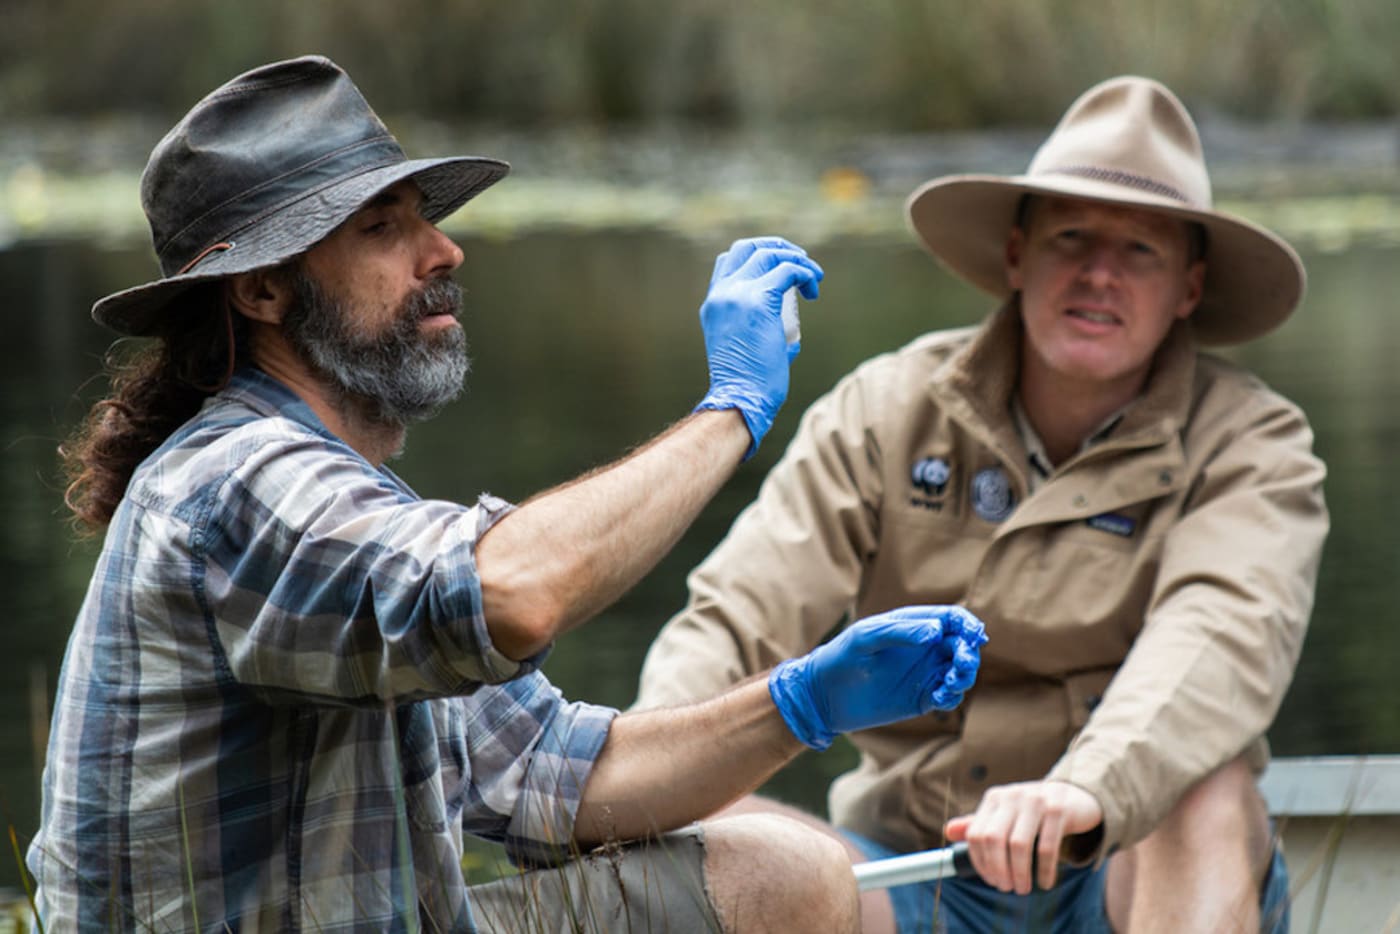 UNSW researcher Gilad Bino (left) and WWF-Australia’s Rob Brewster (right) collect samples of environmental DNA (eDNA) from a creek in the Royal National Park in Sydney